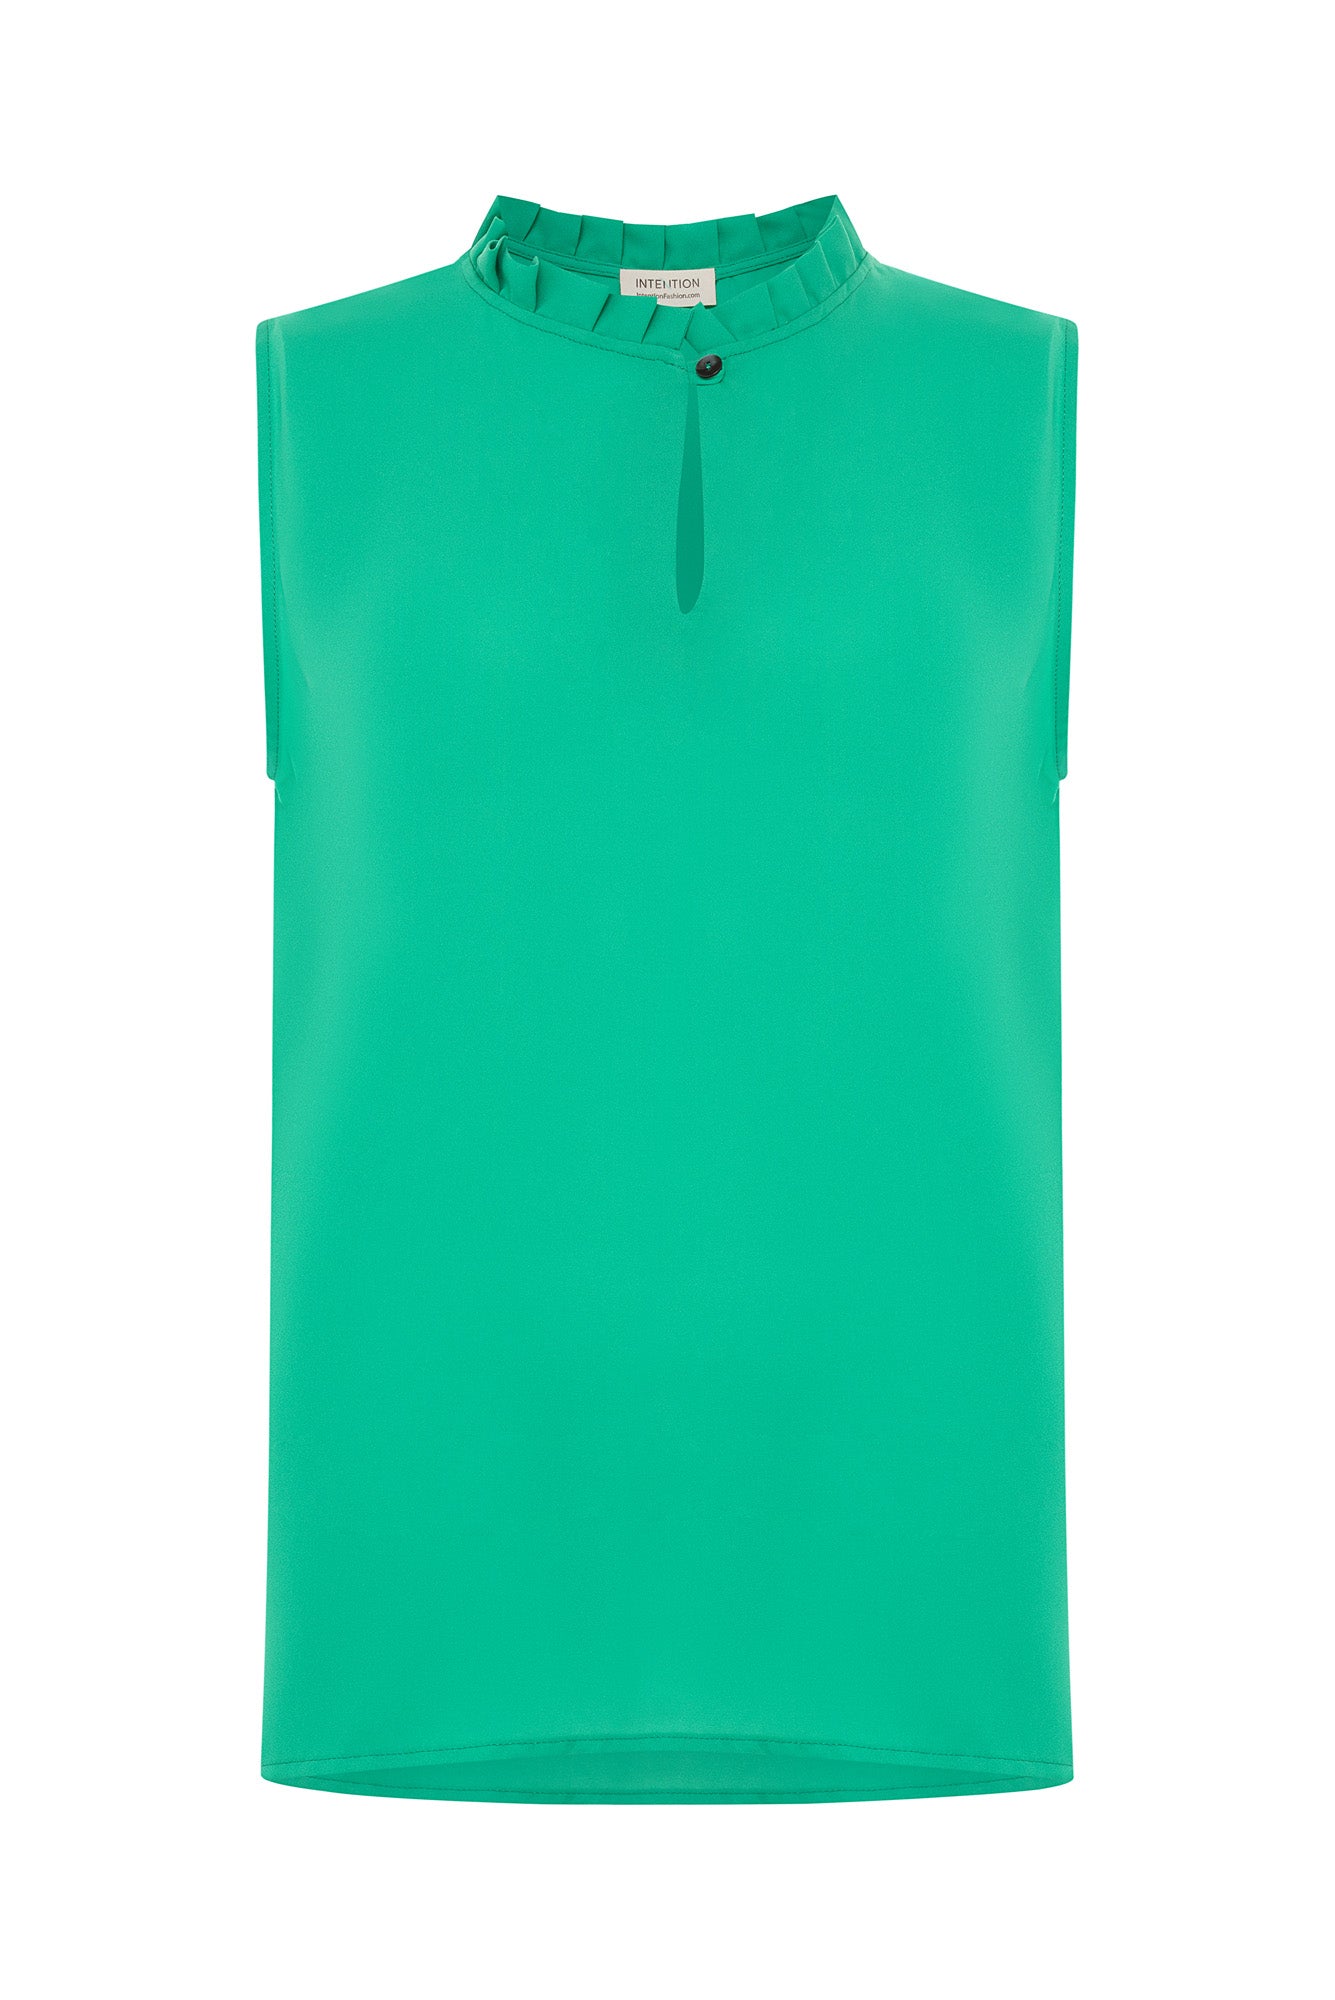 sustainable-clothing-brand-Intention-green-keyhole-top